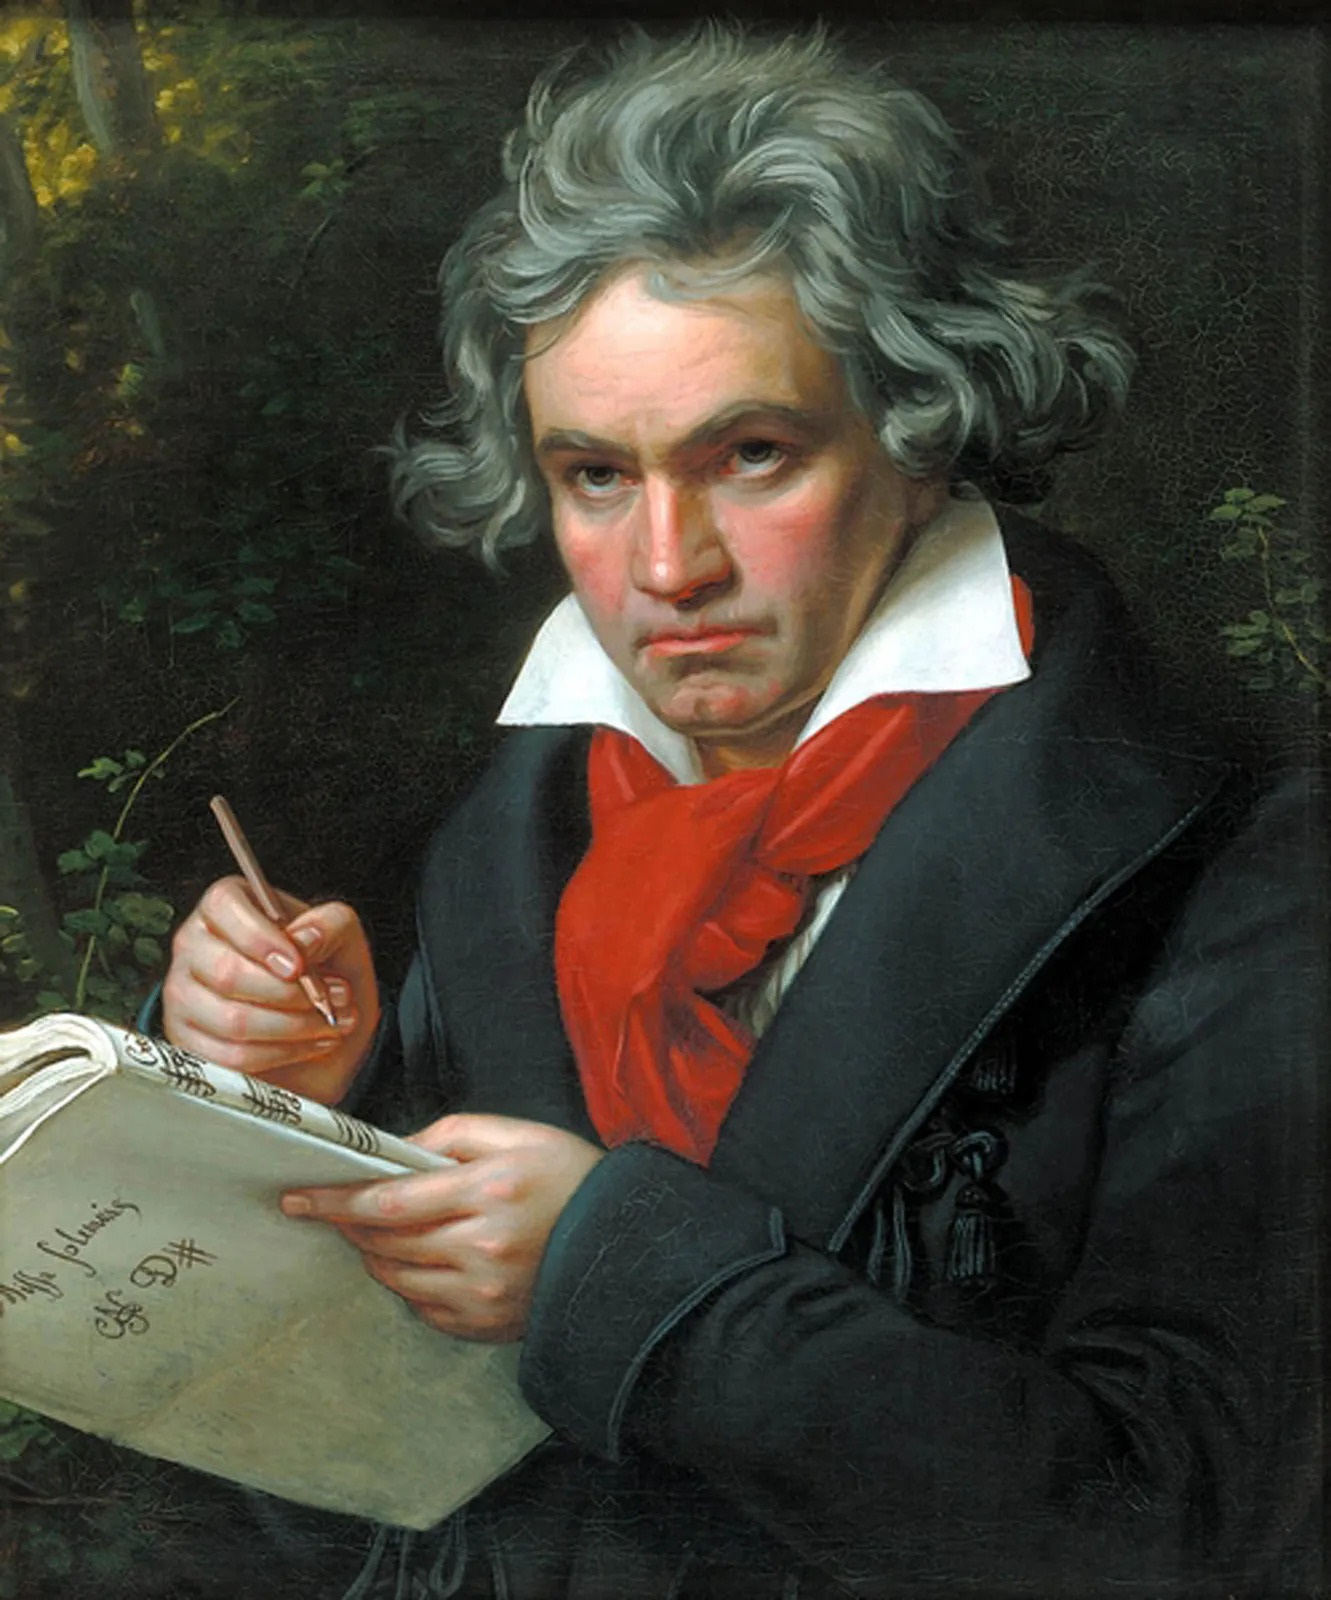 Illustration of Beethoven taking musical notes for Symphony No. 9